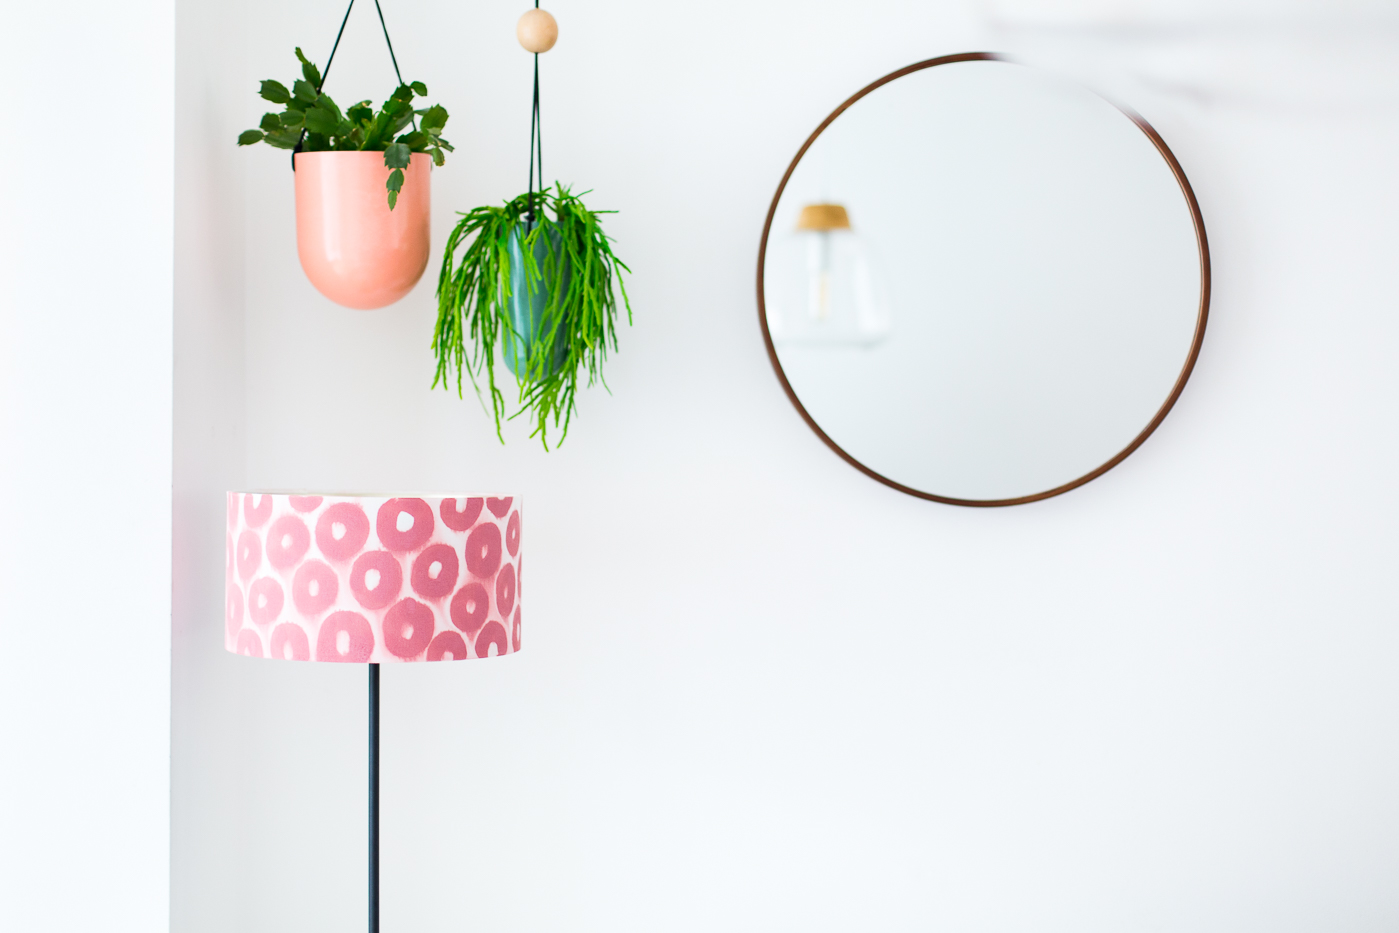 Paint this DIY Print Effect Patterned Lampshade